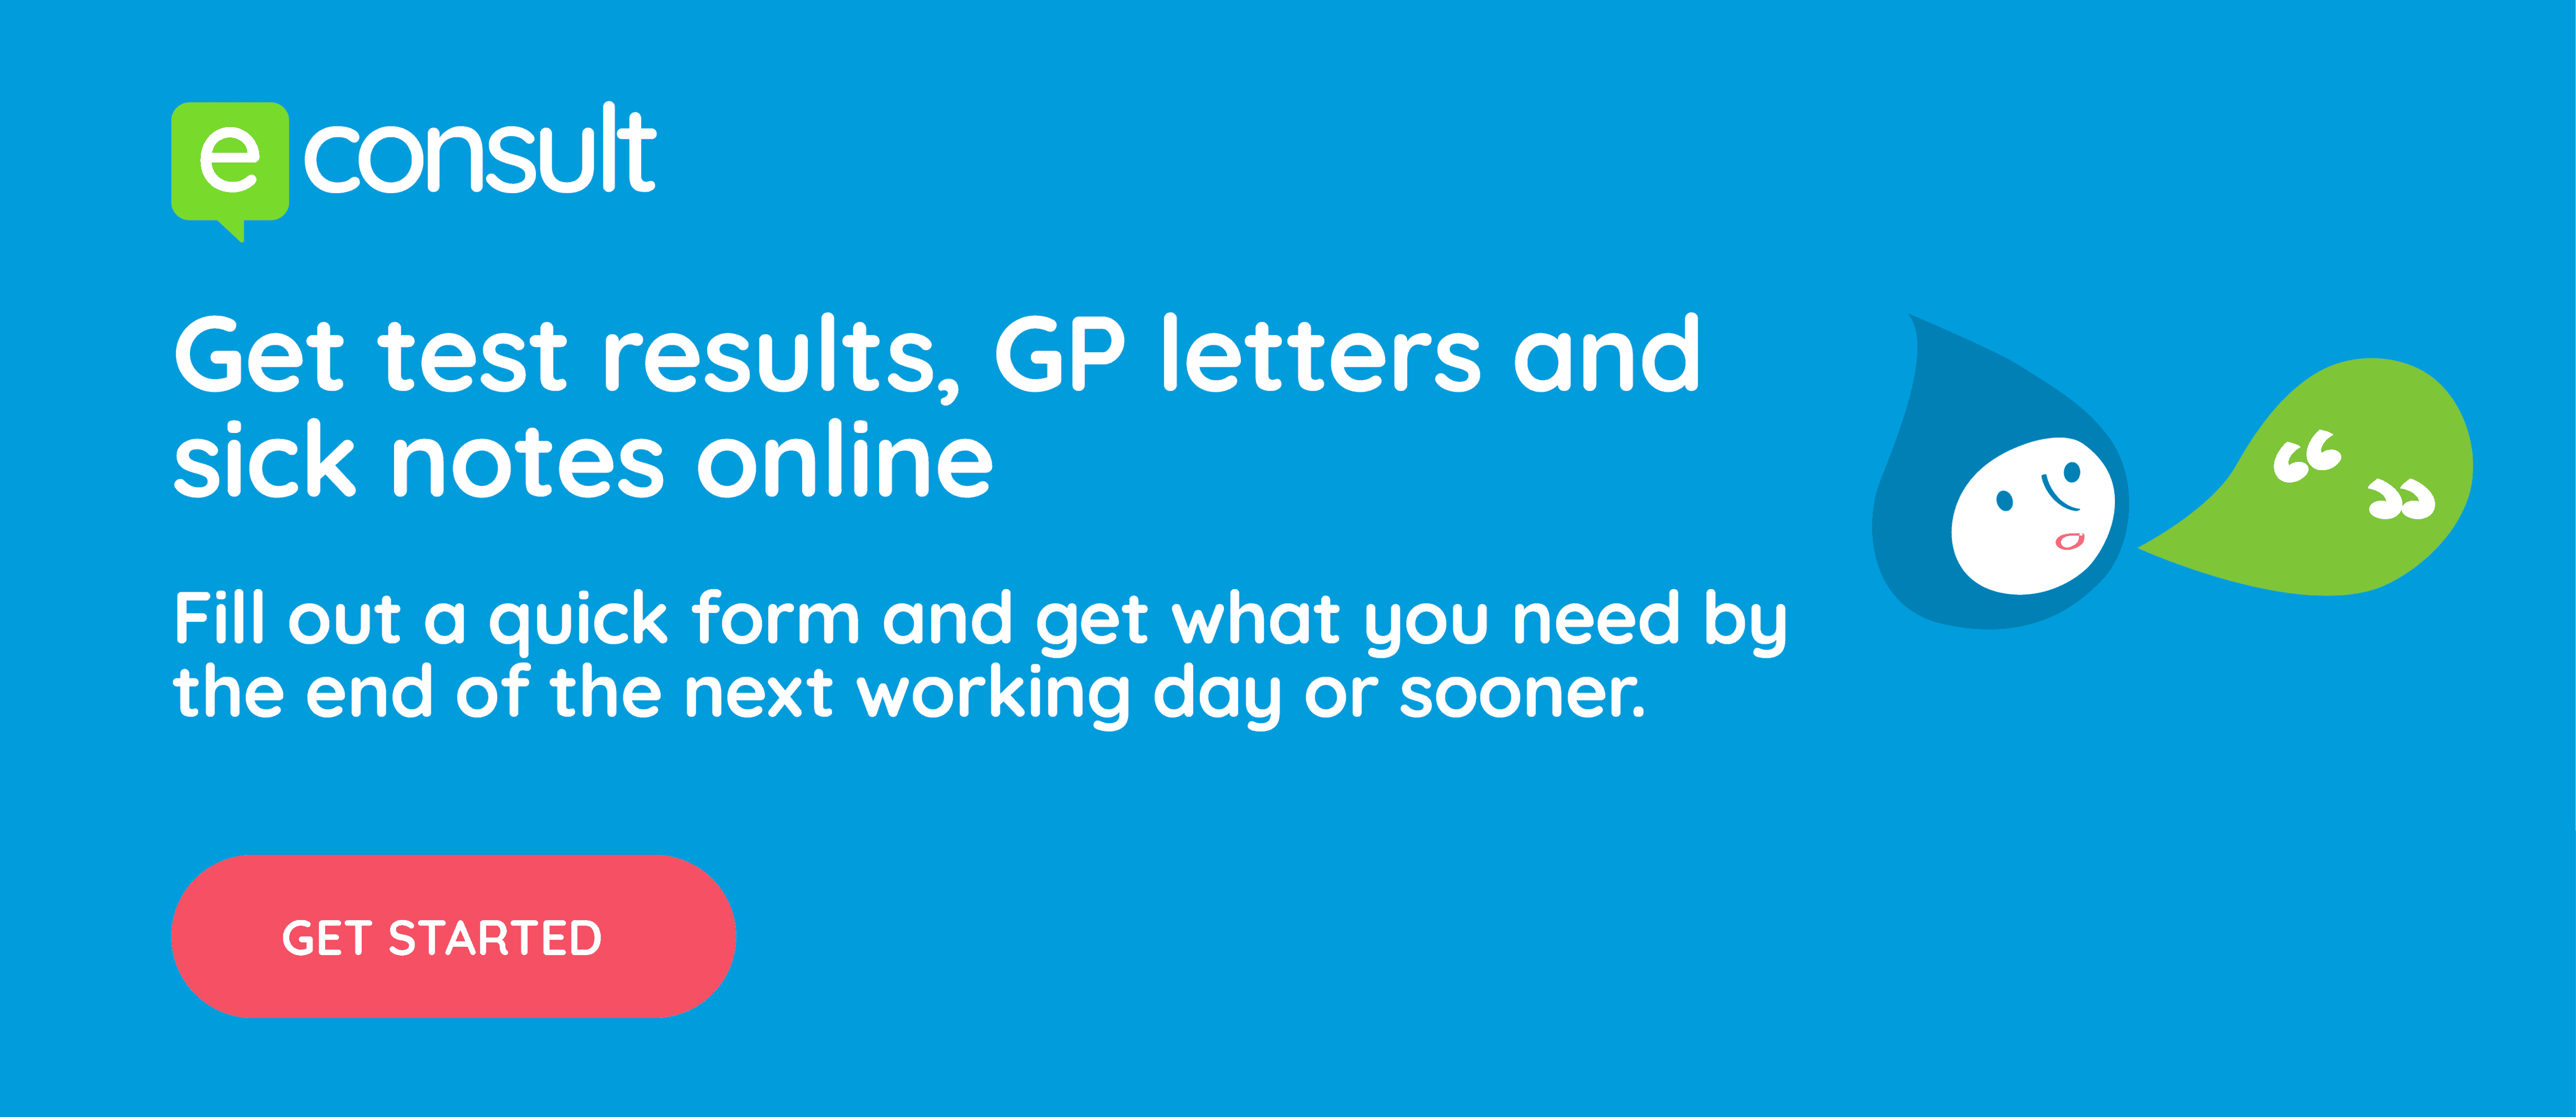 Get test results, GP letters and sick notes online